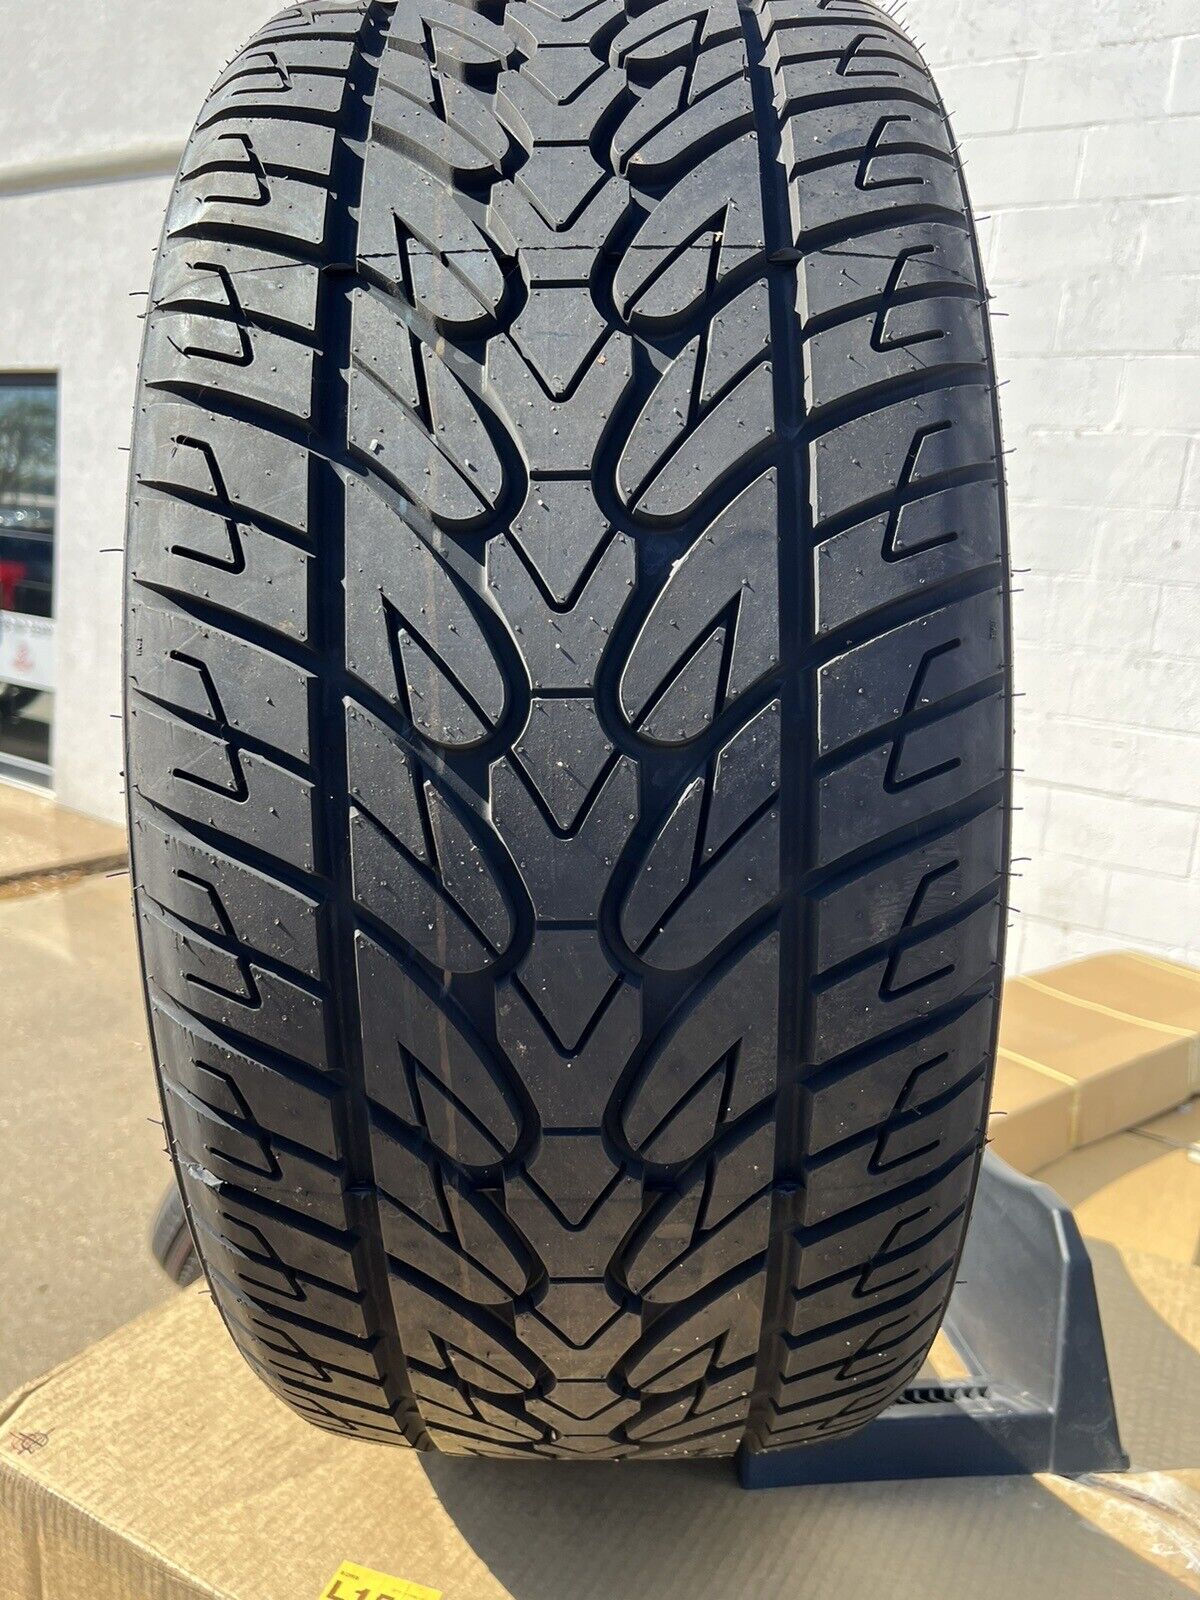 295-30-26 Versa TRX 6000 Tyre -Old Stock- New HL Tire. Discounted